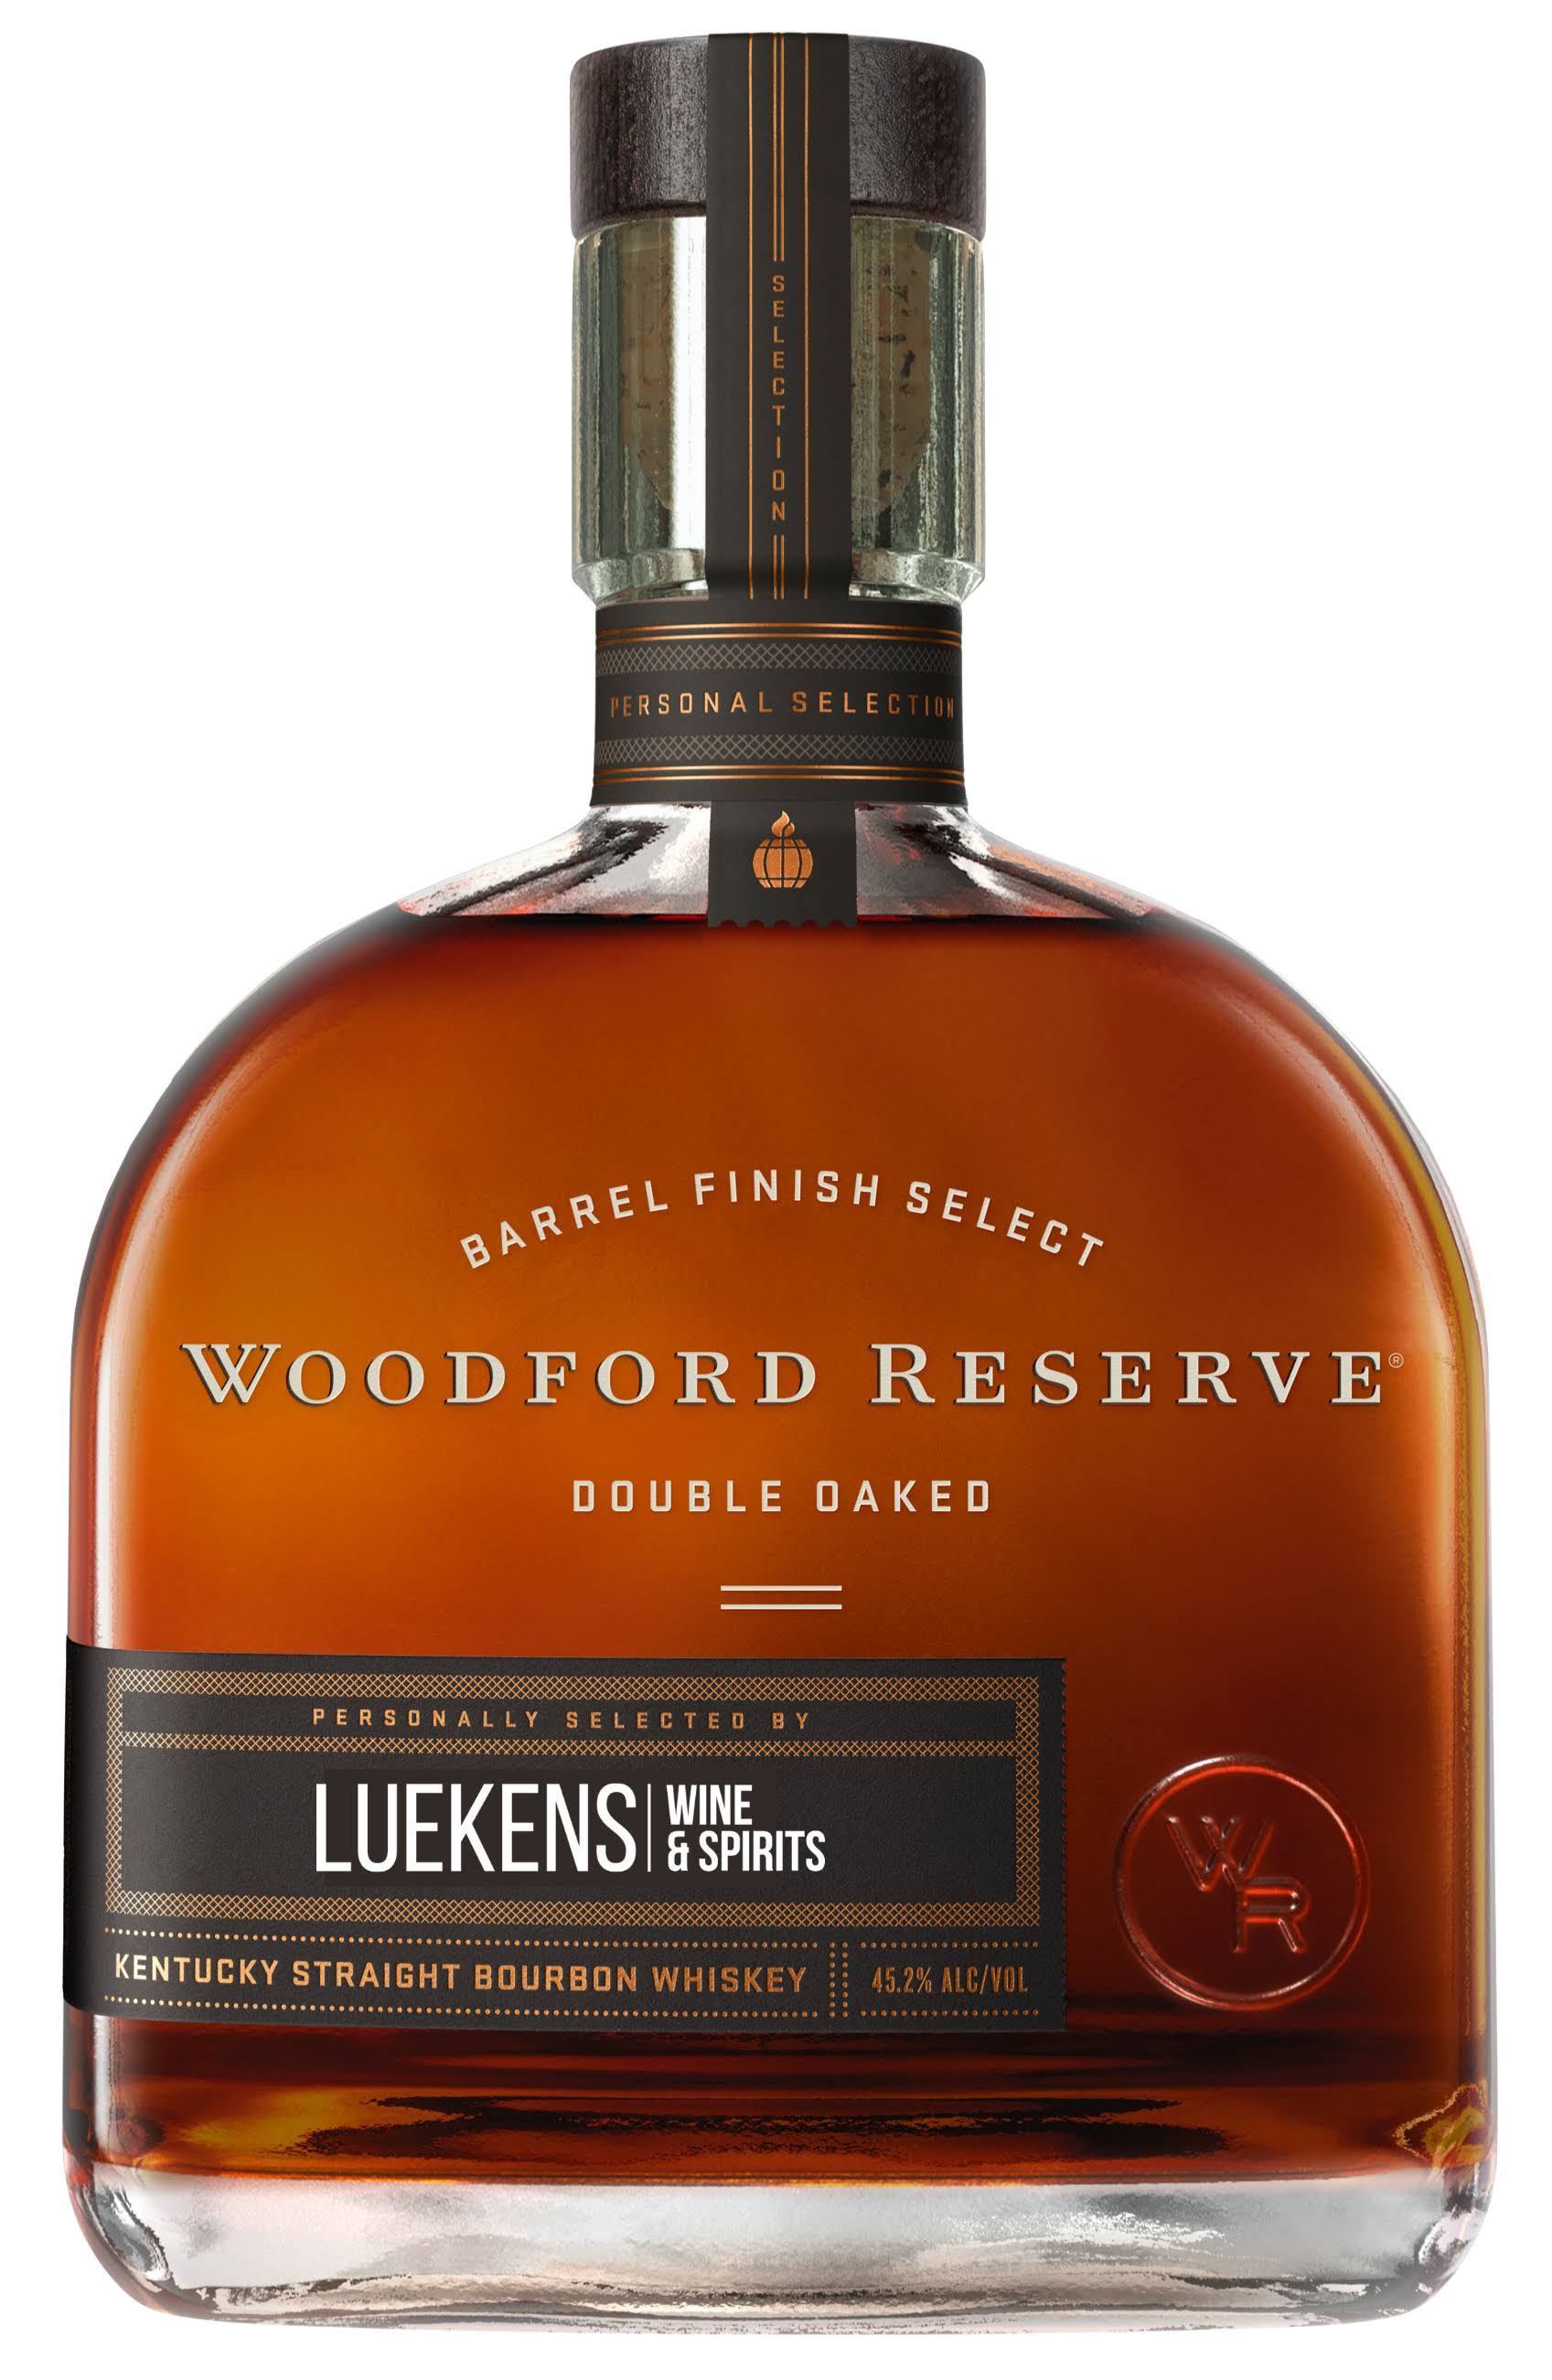 Woodford Reserve Double Oaked Personal Selection Bourbon, Kentucky Straight Bourbon Whiskey - 1 lt